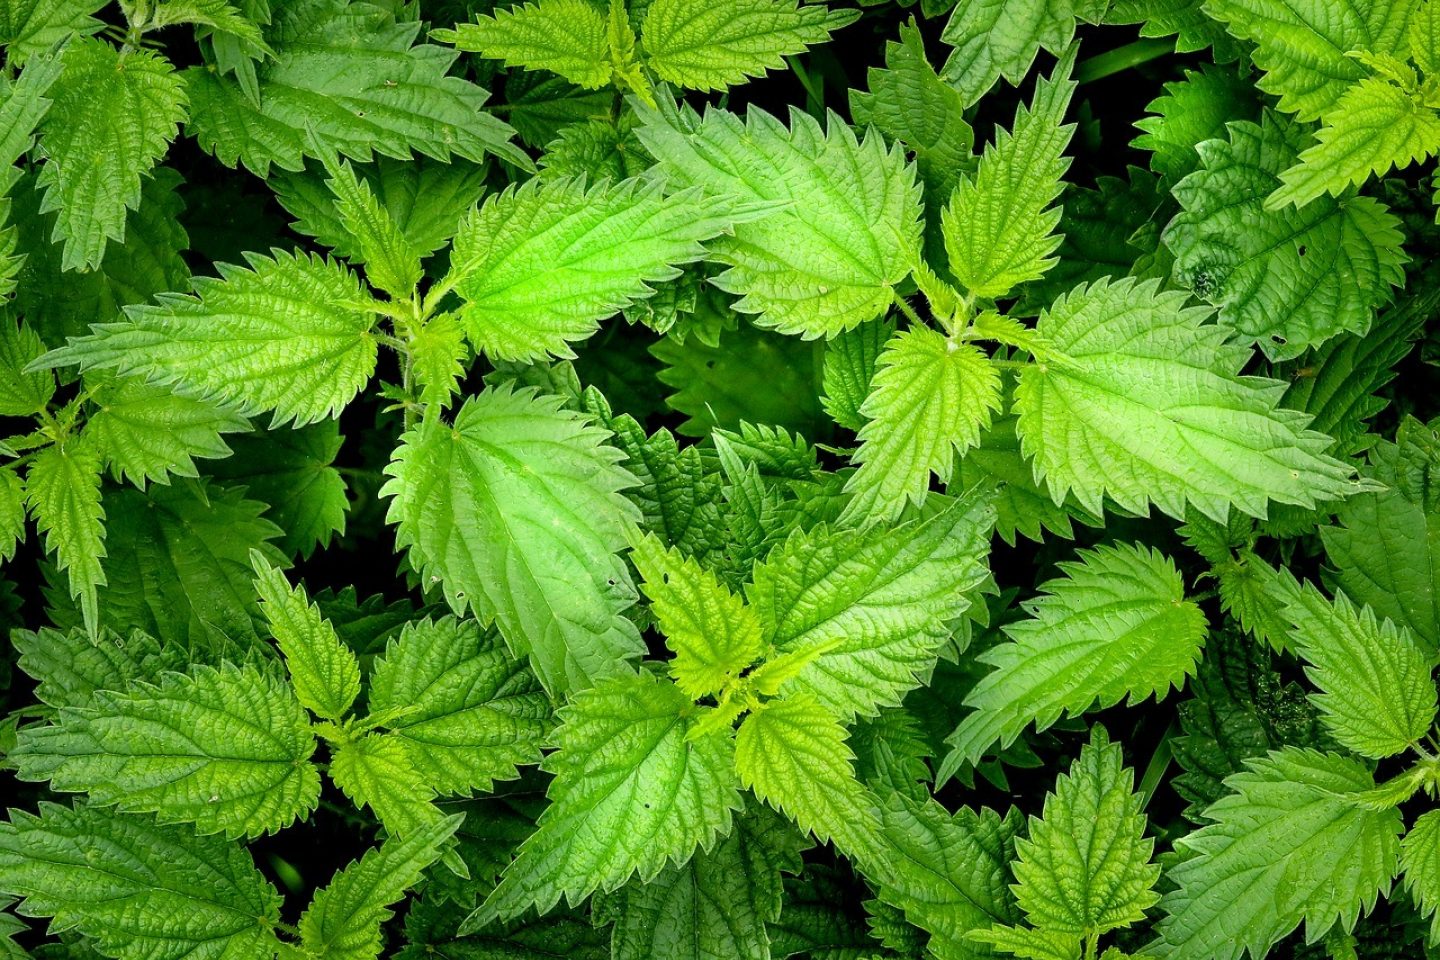 A large clump of nettles